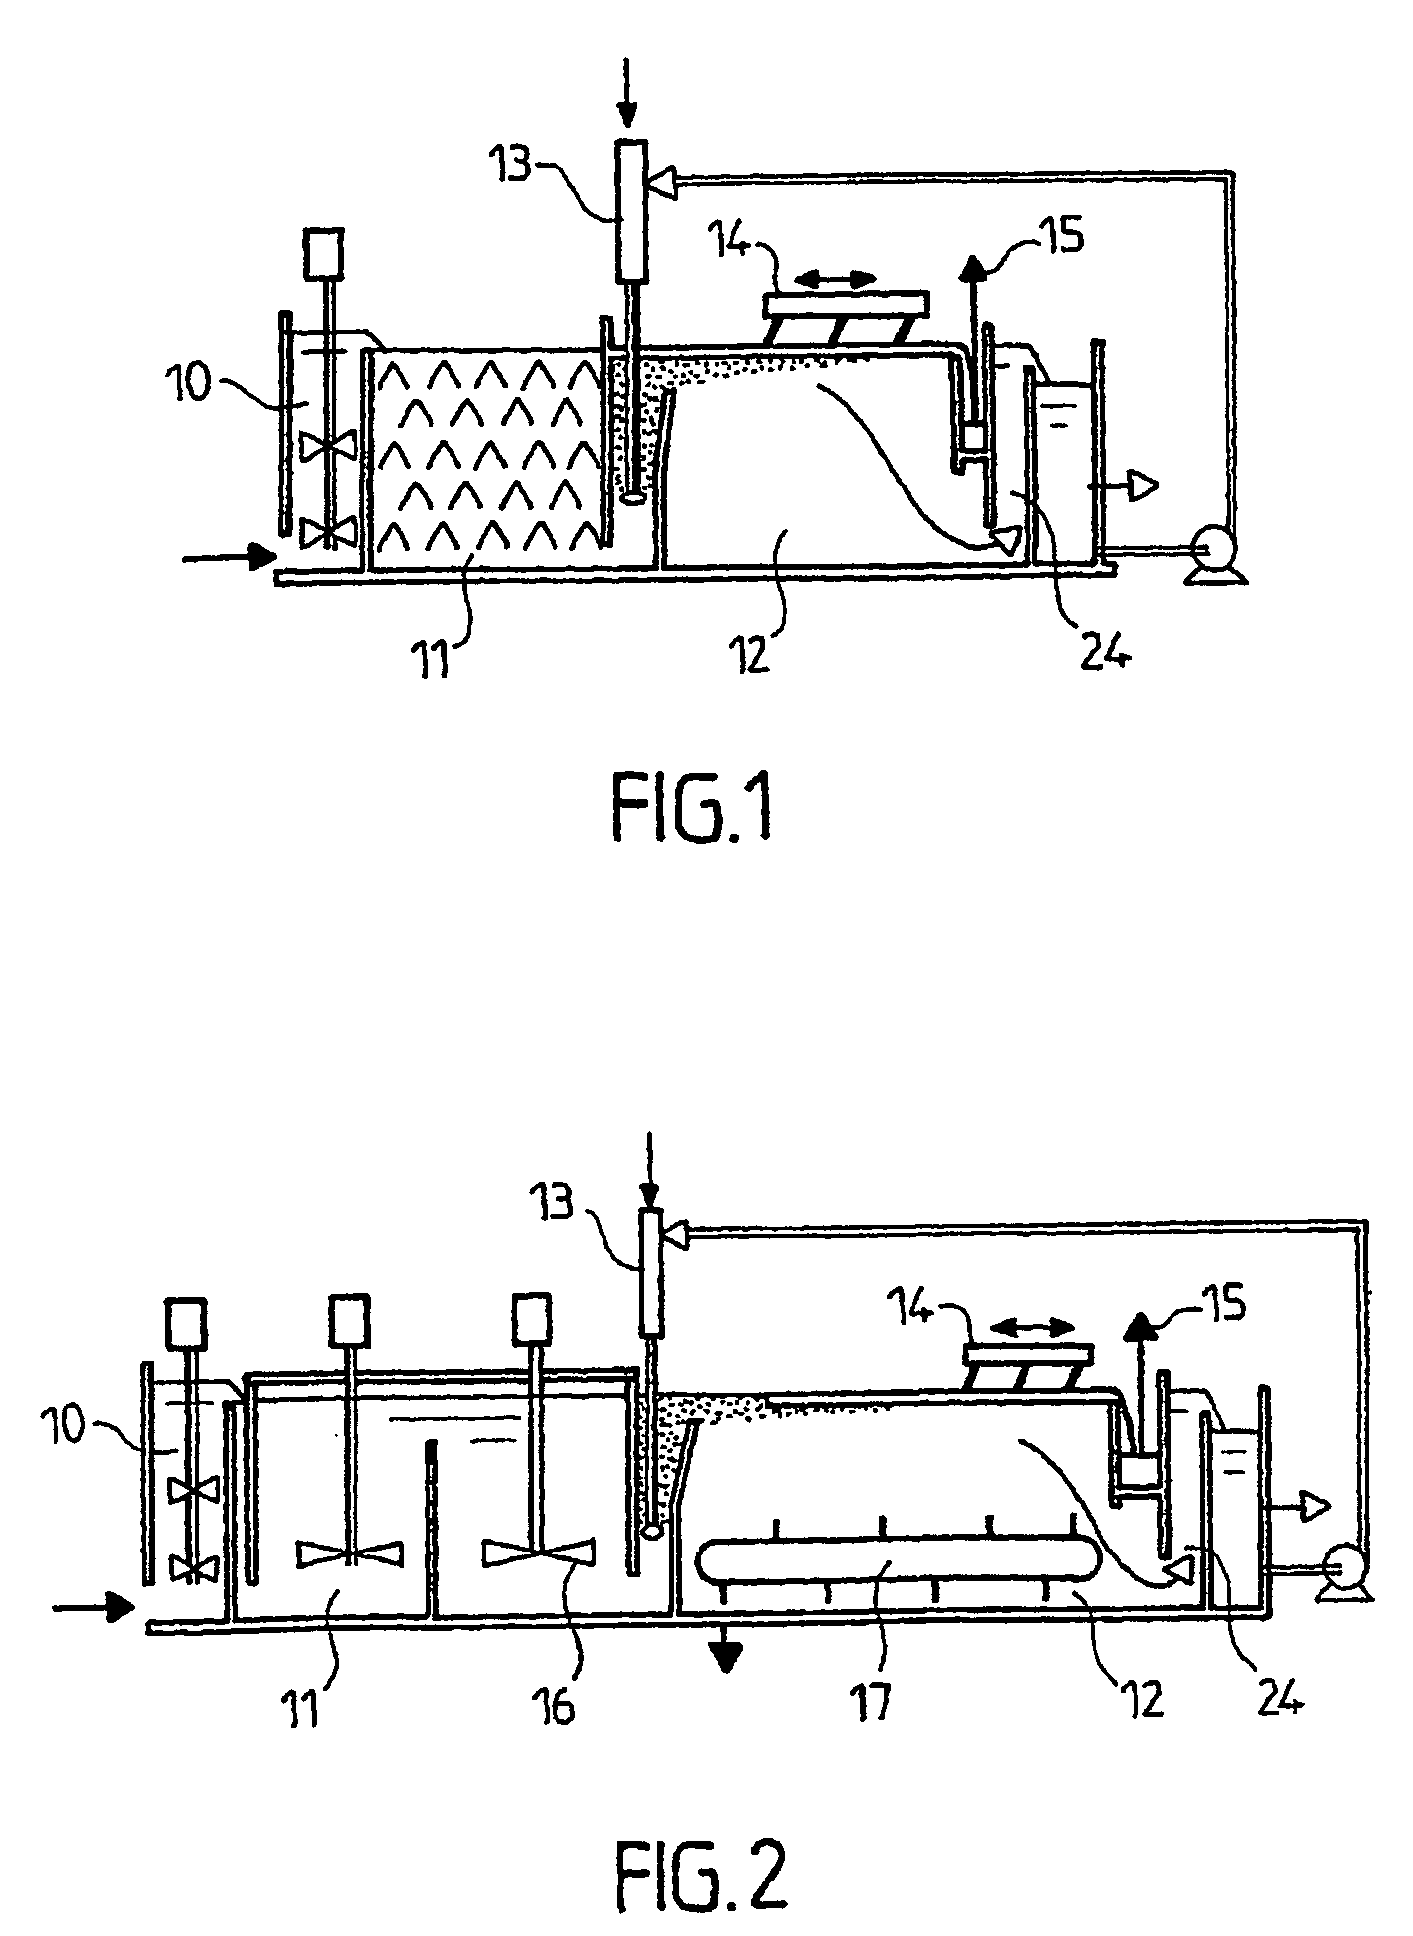 Method and device for clarification of liquids, particularly water, loaded with material in suspension